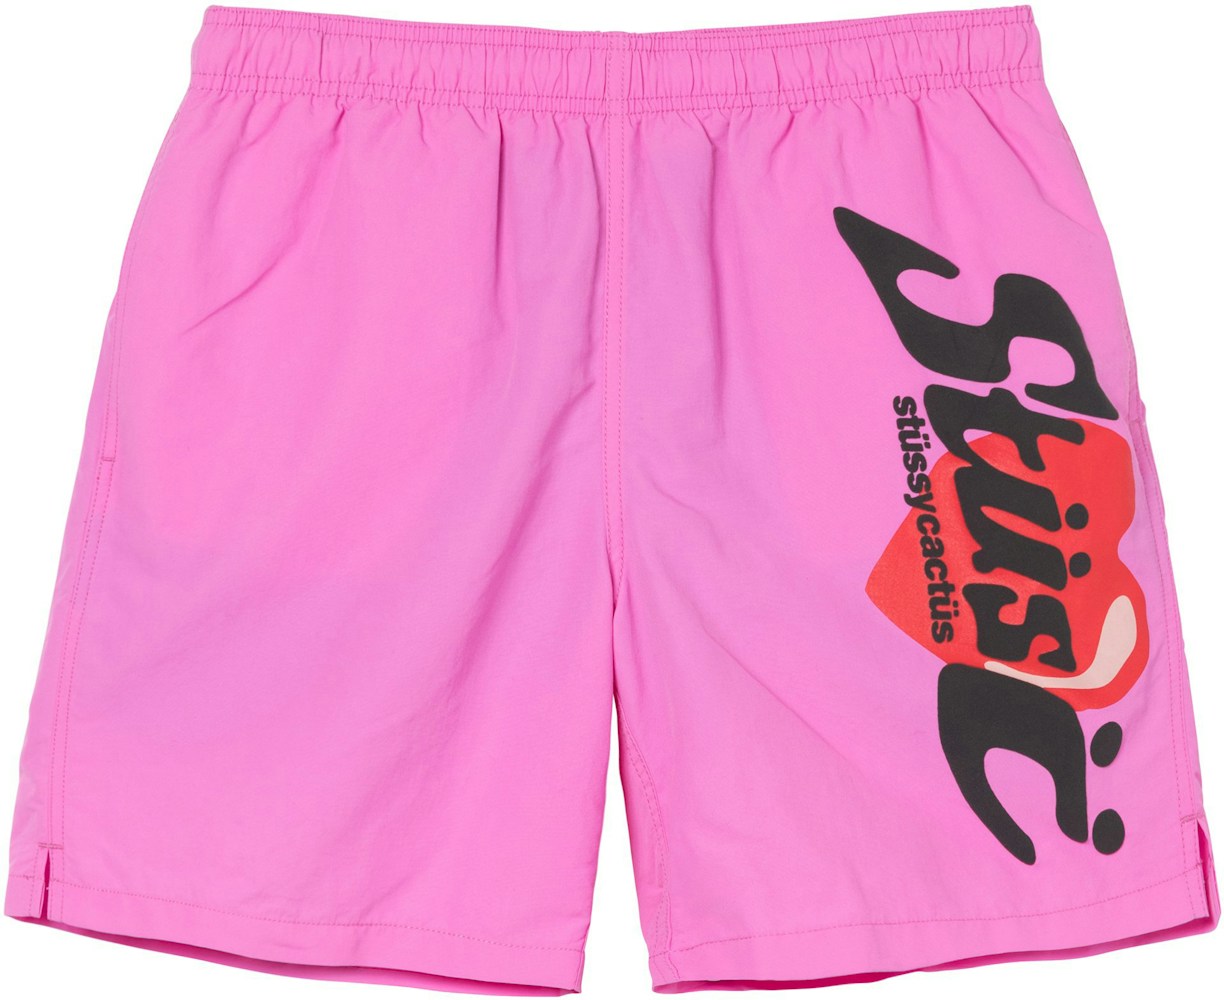 Stussy x CPFM Water Shorts Pink - SS21